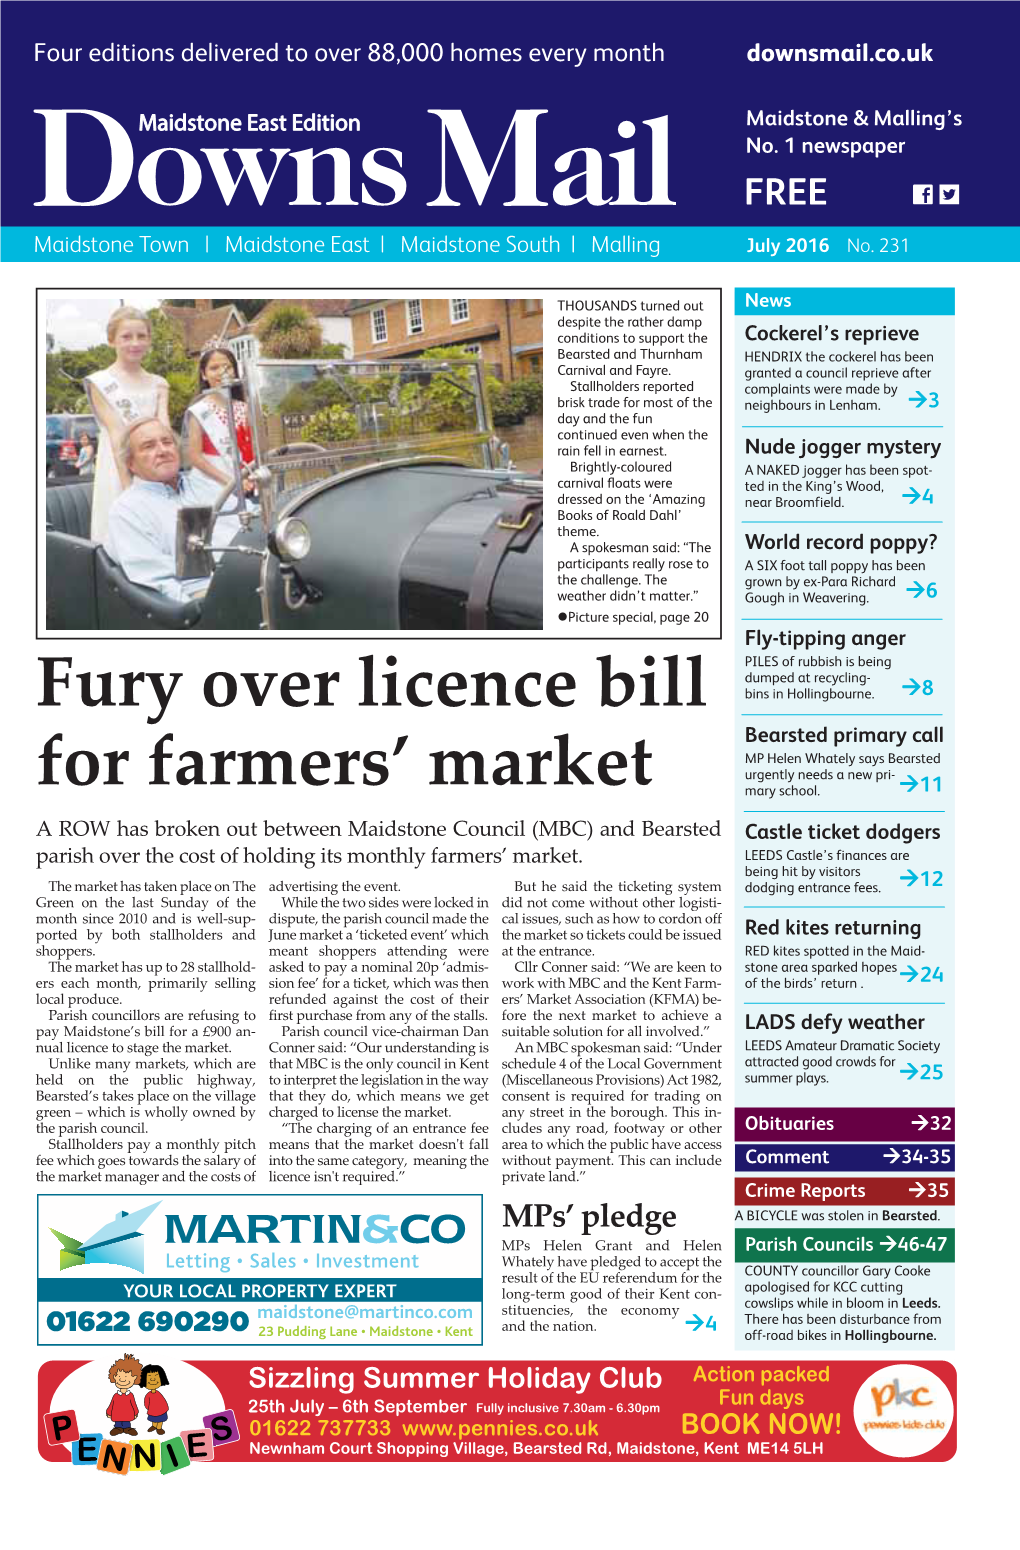 Fury Over Licence Bill for Farmers' Market